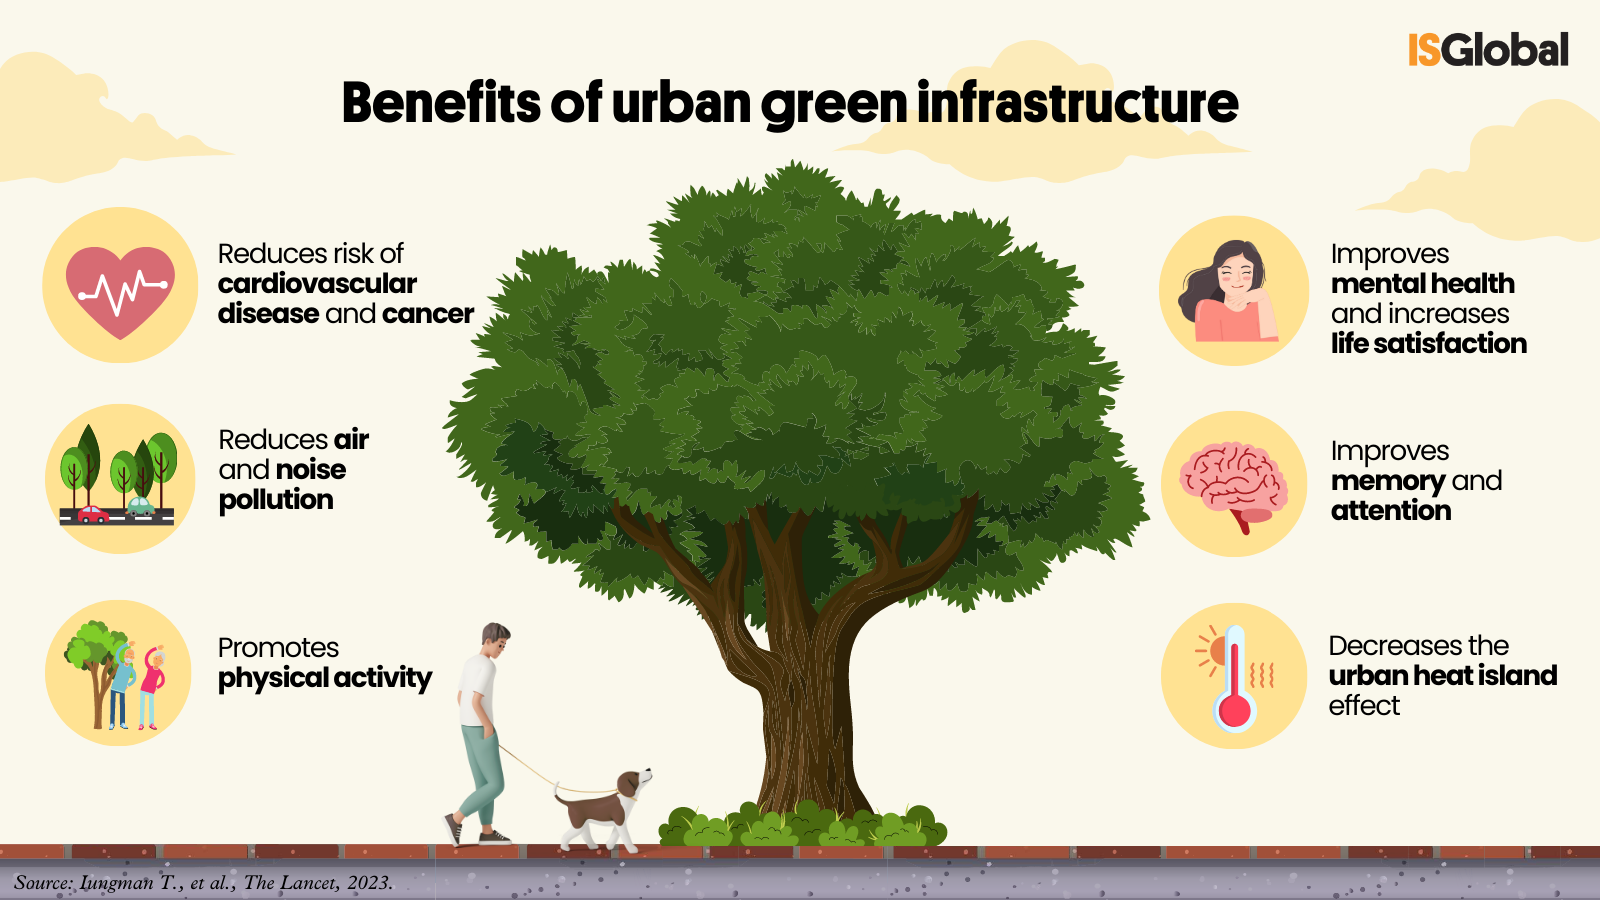 Cooling cities through urban green infrastructure: a health impact assessment of European cities